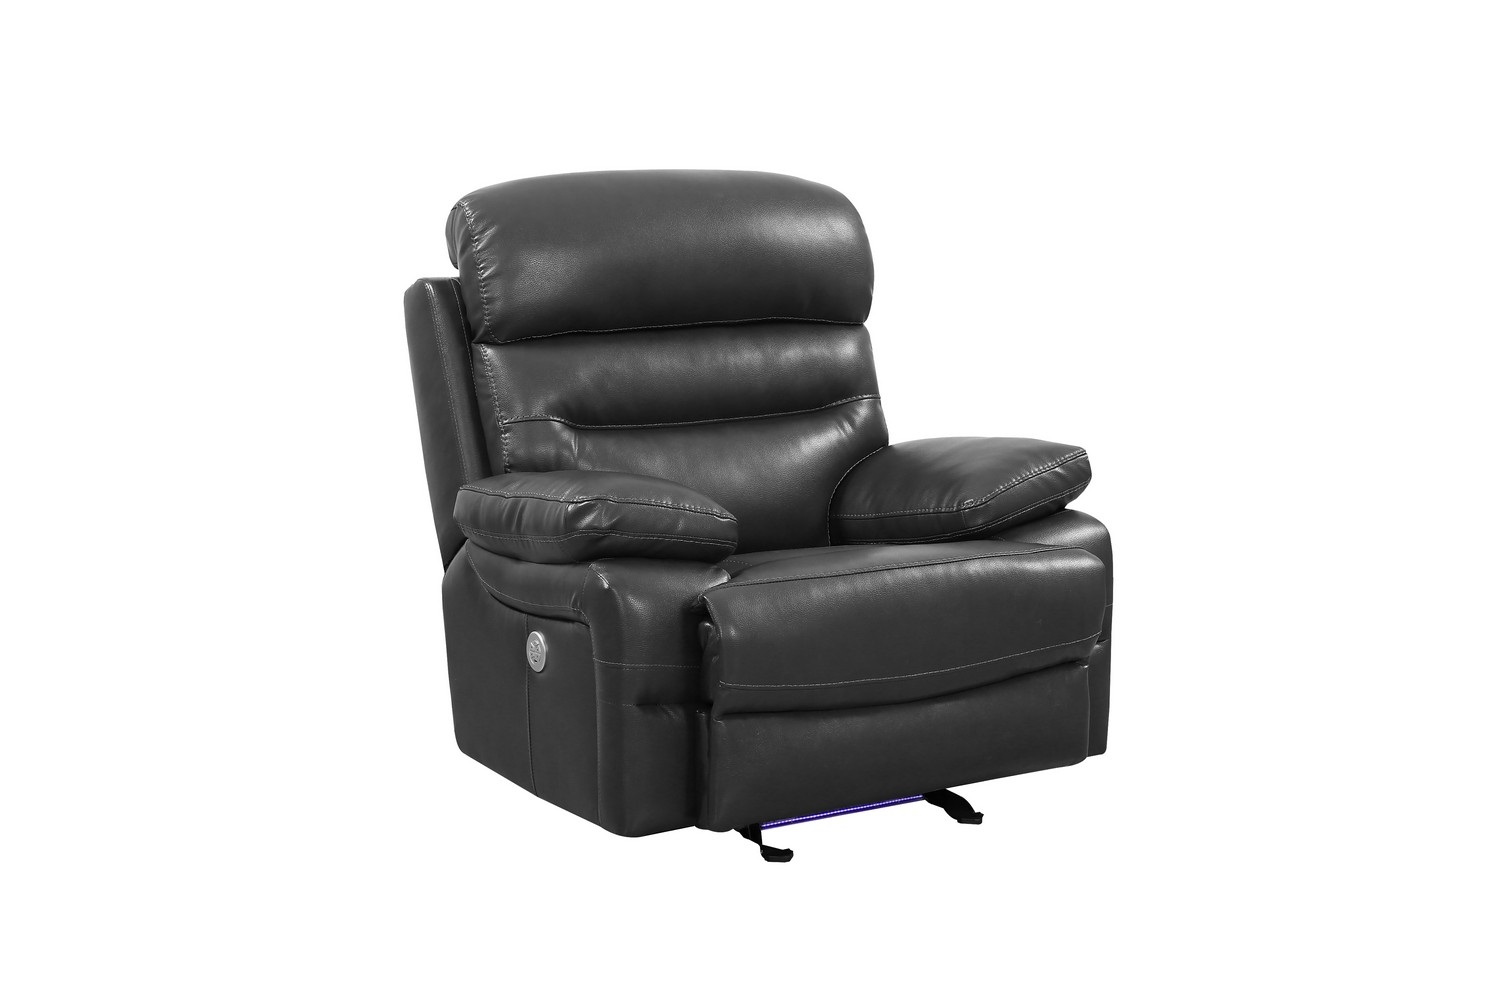 43" Grey Faux Leather Power Recliner Chair-366318-1